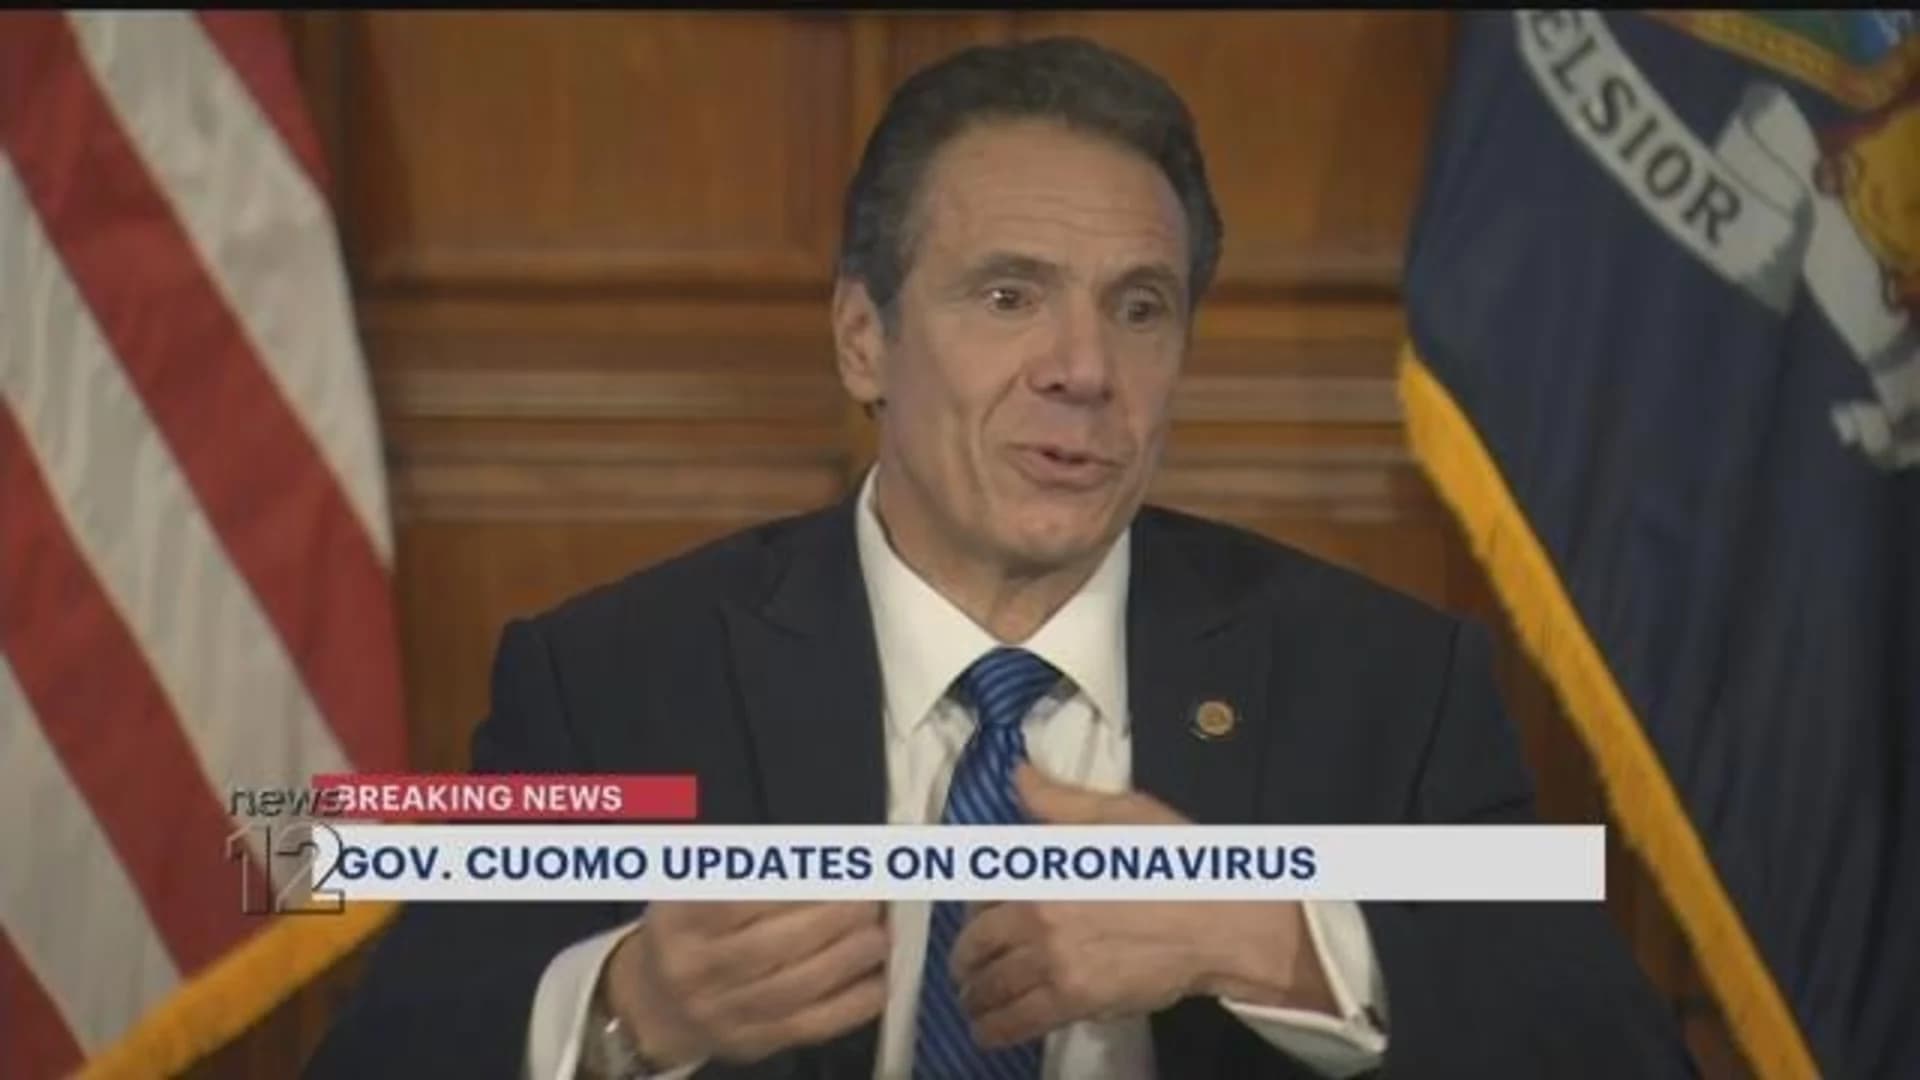 Gov. Cuomo says he won't quarrel with President Trump, who alluded to a mutiny by Democratic governors